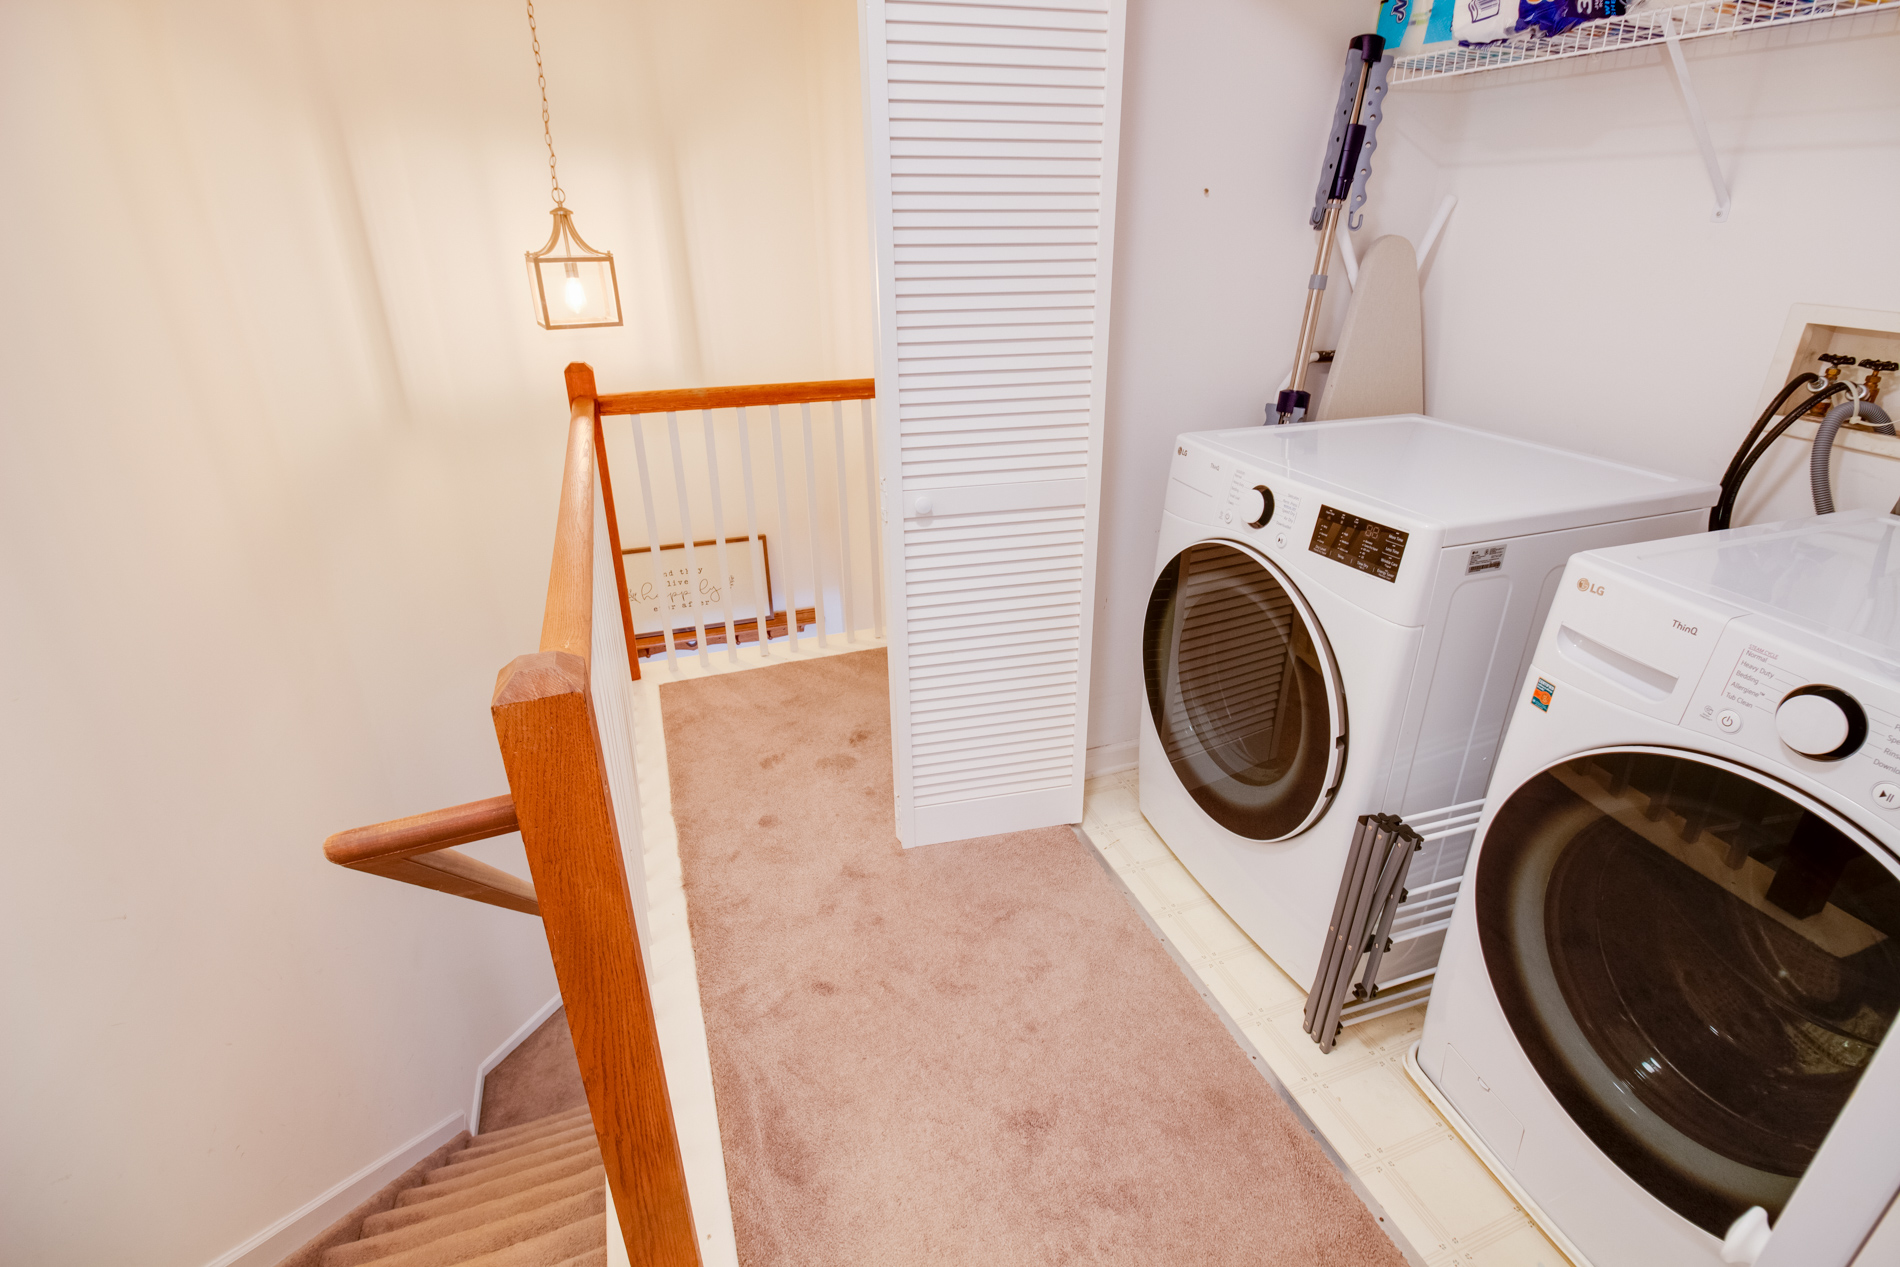 Hallway laundry - new washer and new dryer!